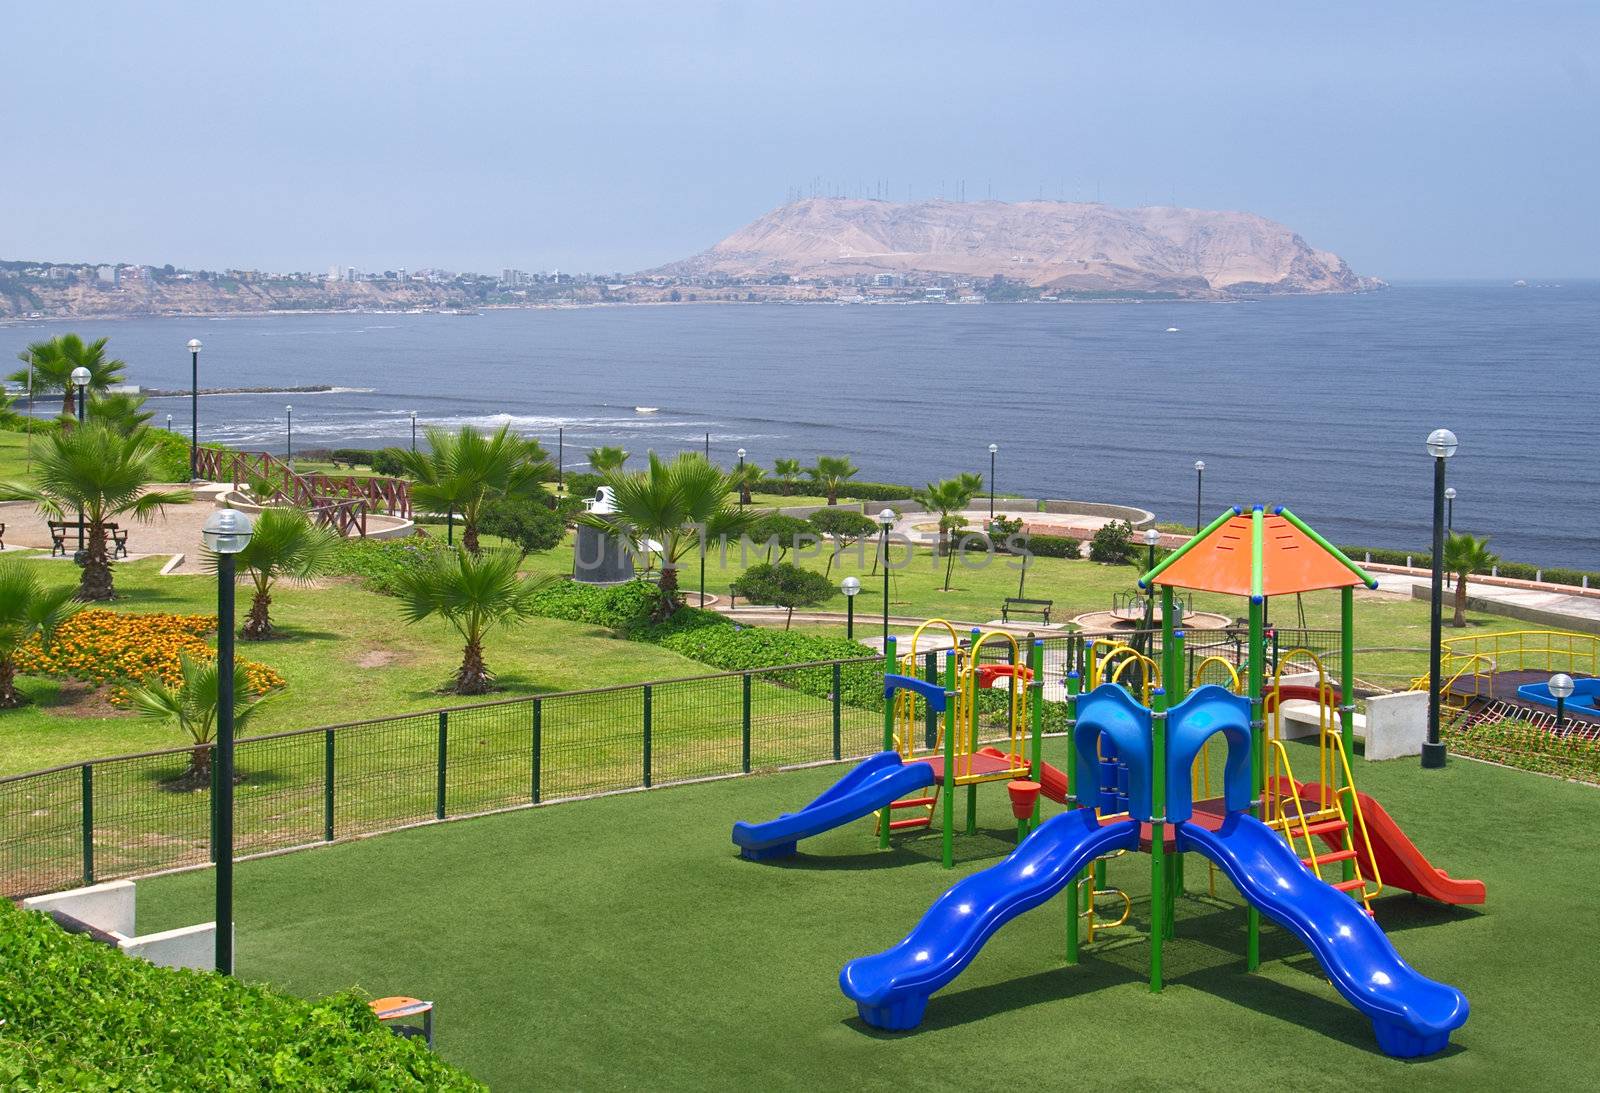 Playground on a sunny day in a park in Miraflores, Lima, Peru